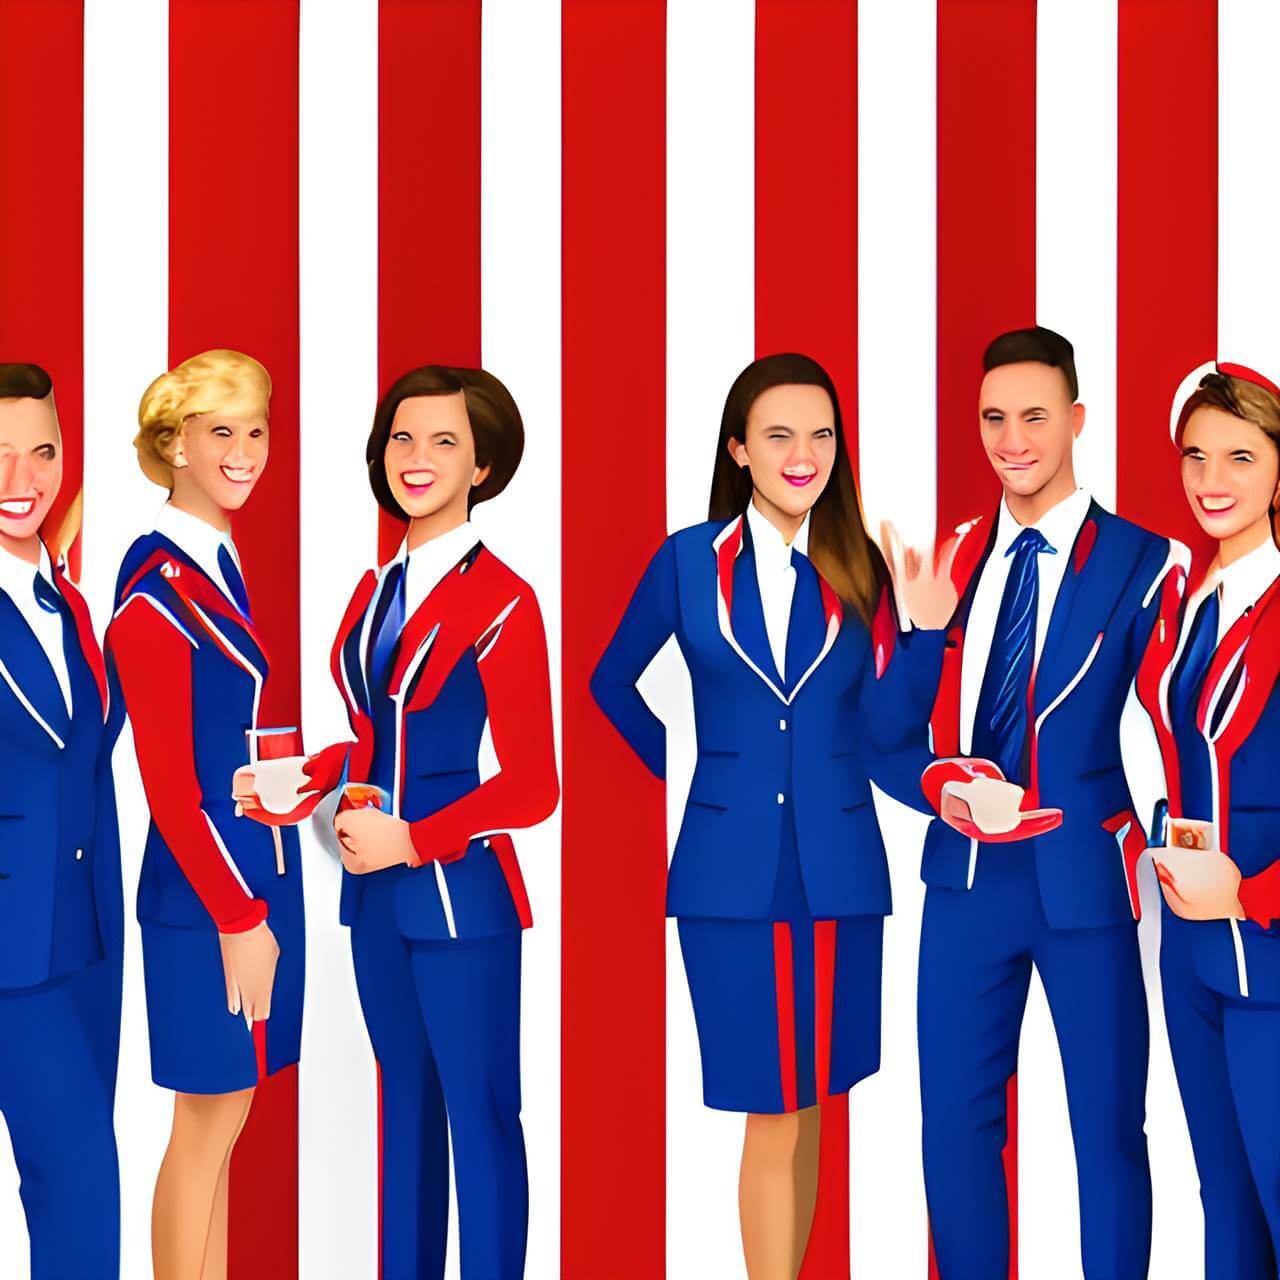 How to become a cabin crew in Croatia